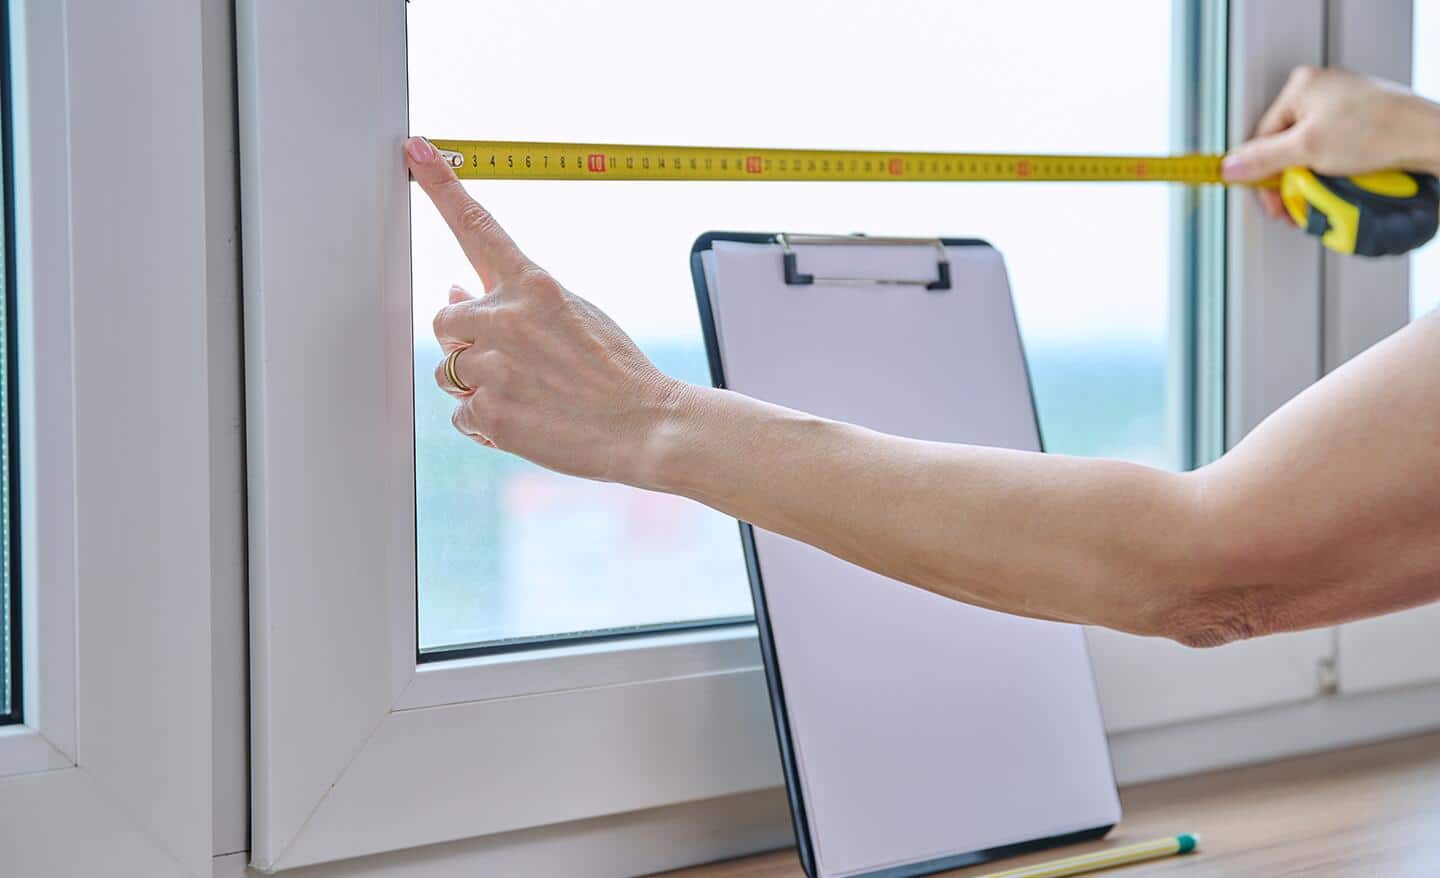 A person measures a window's width using a tape measure.